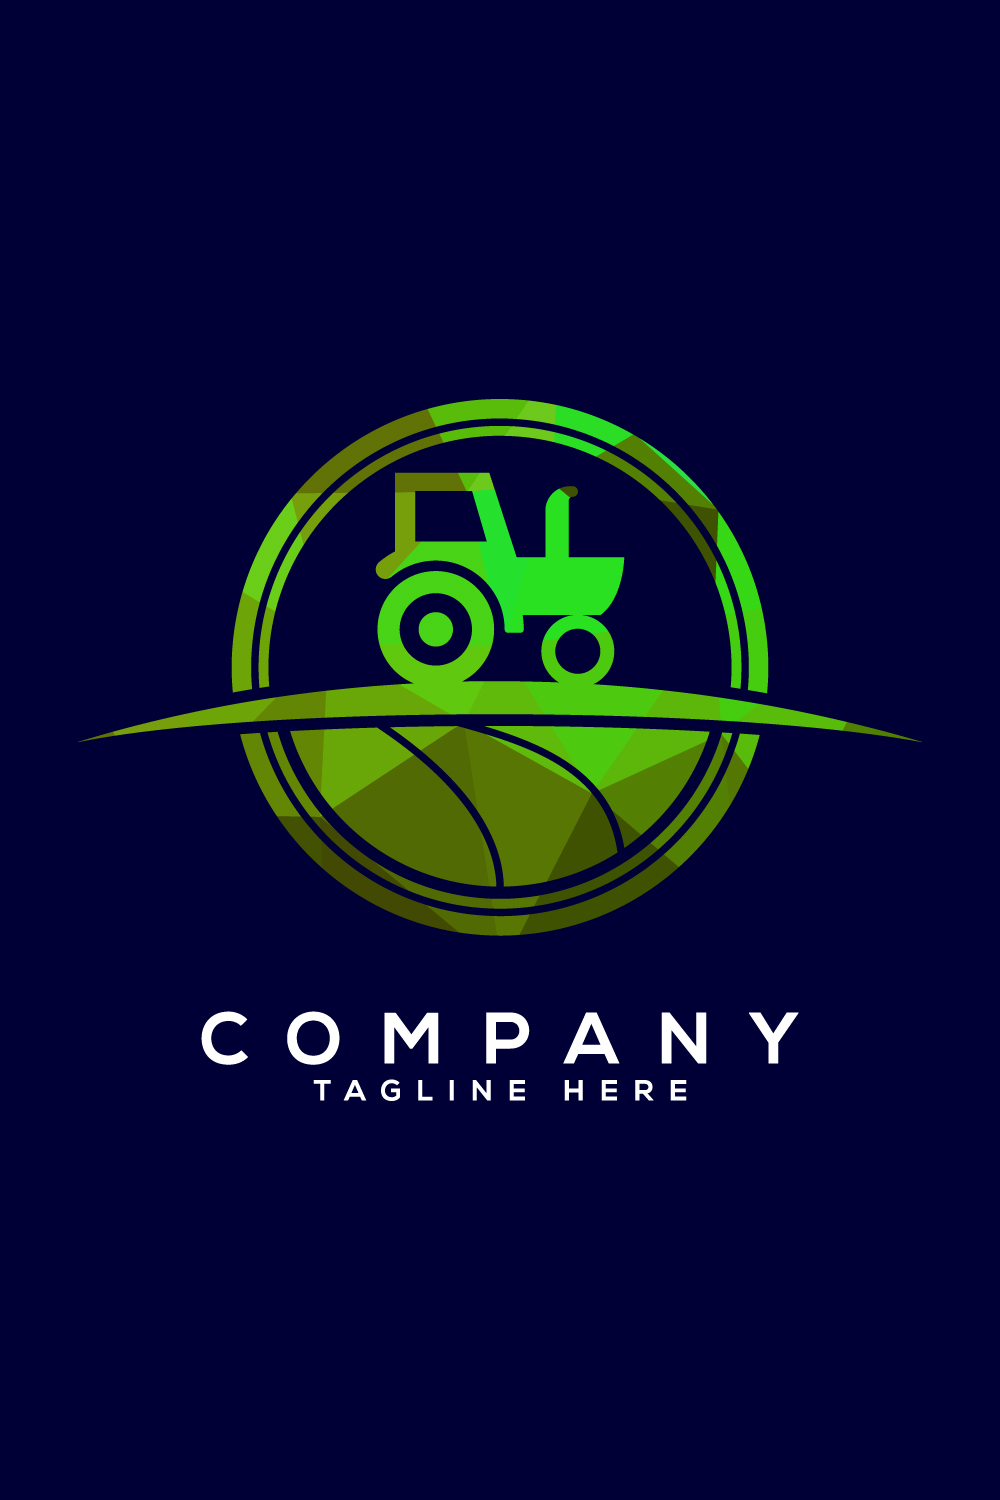 Tractor or farm low poly style logo design, suitable for any business related to agriculture industries pinterest preview image.